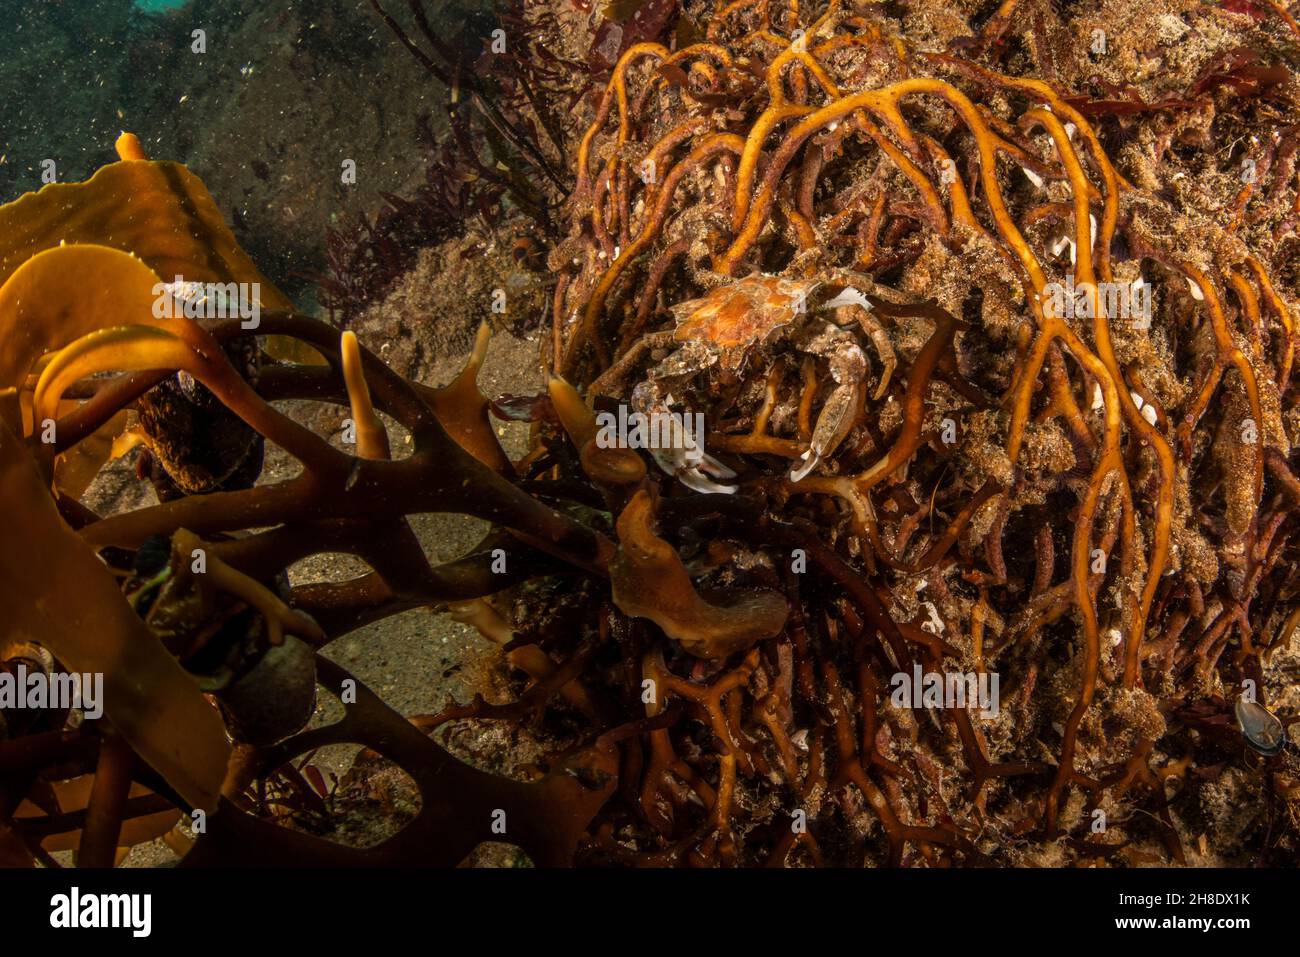 A foliate kelp crab (Pugettia producta) camouflaged on the holdfast of giant kelp (Macrocystis pyrifera) underwater in Monterey Bay, California. Stock Photo